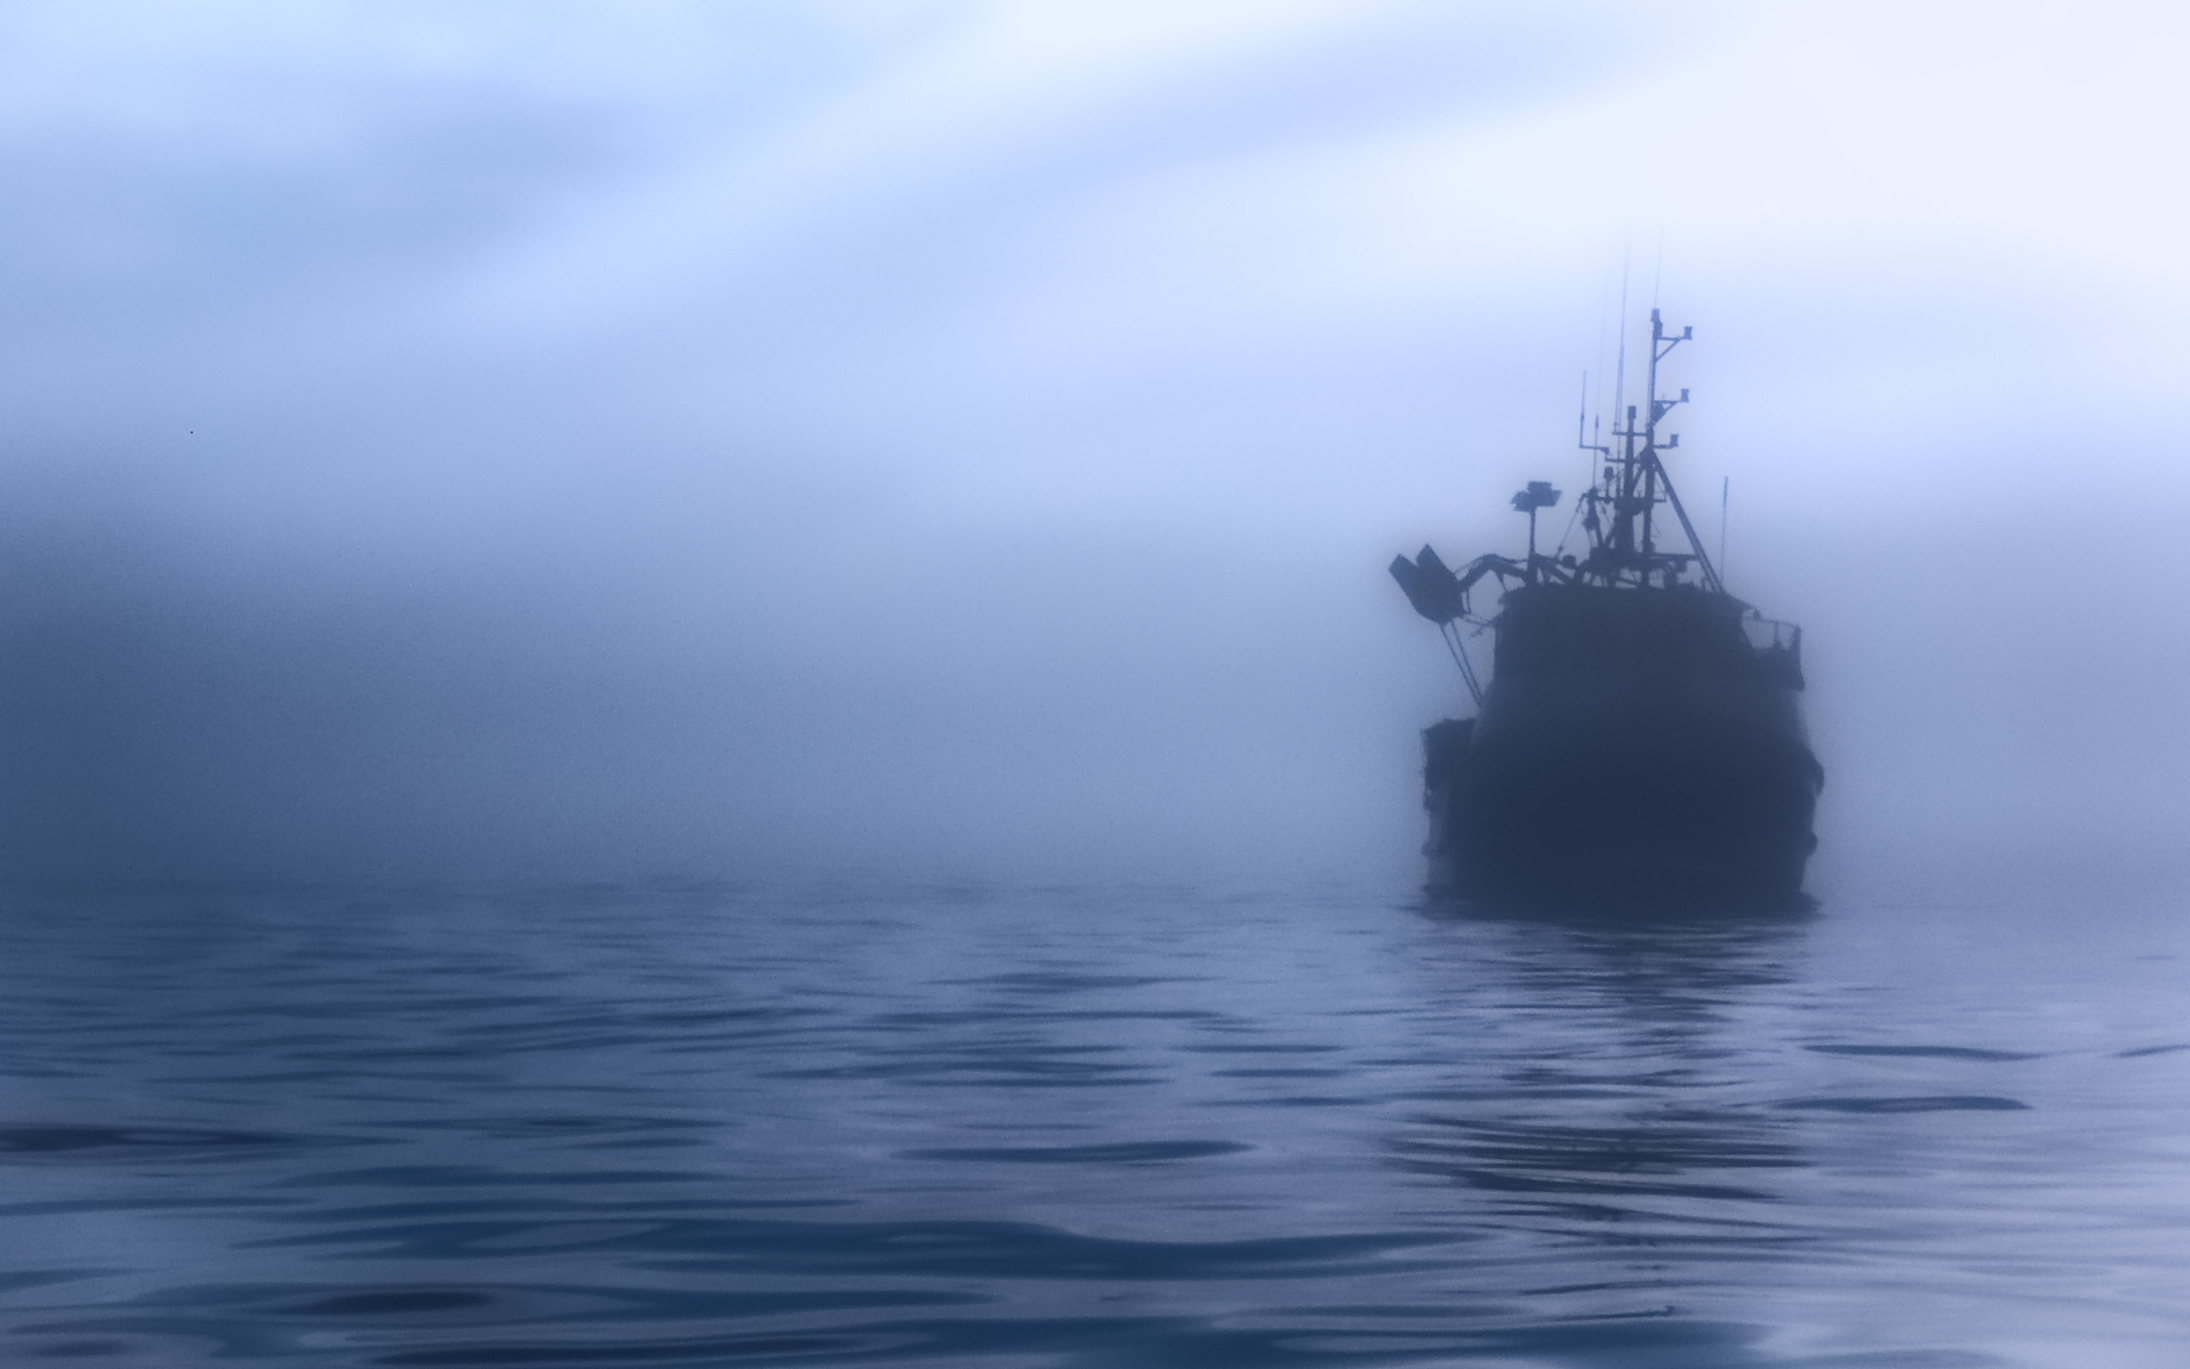 Boat silhouette in mist on calm water